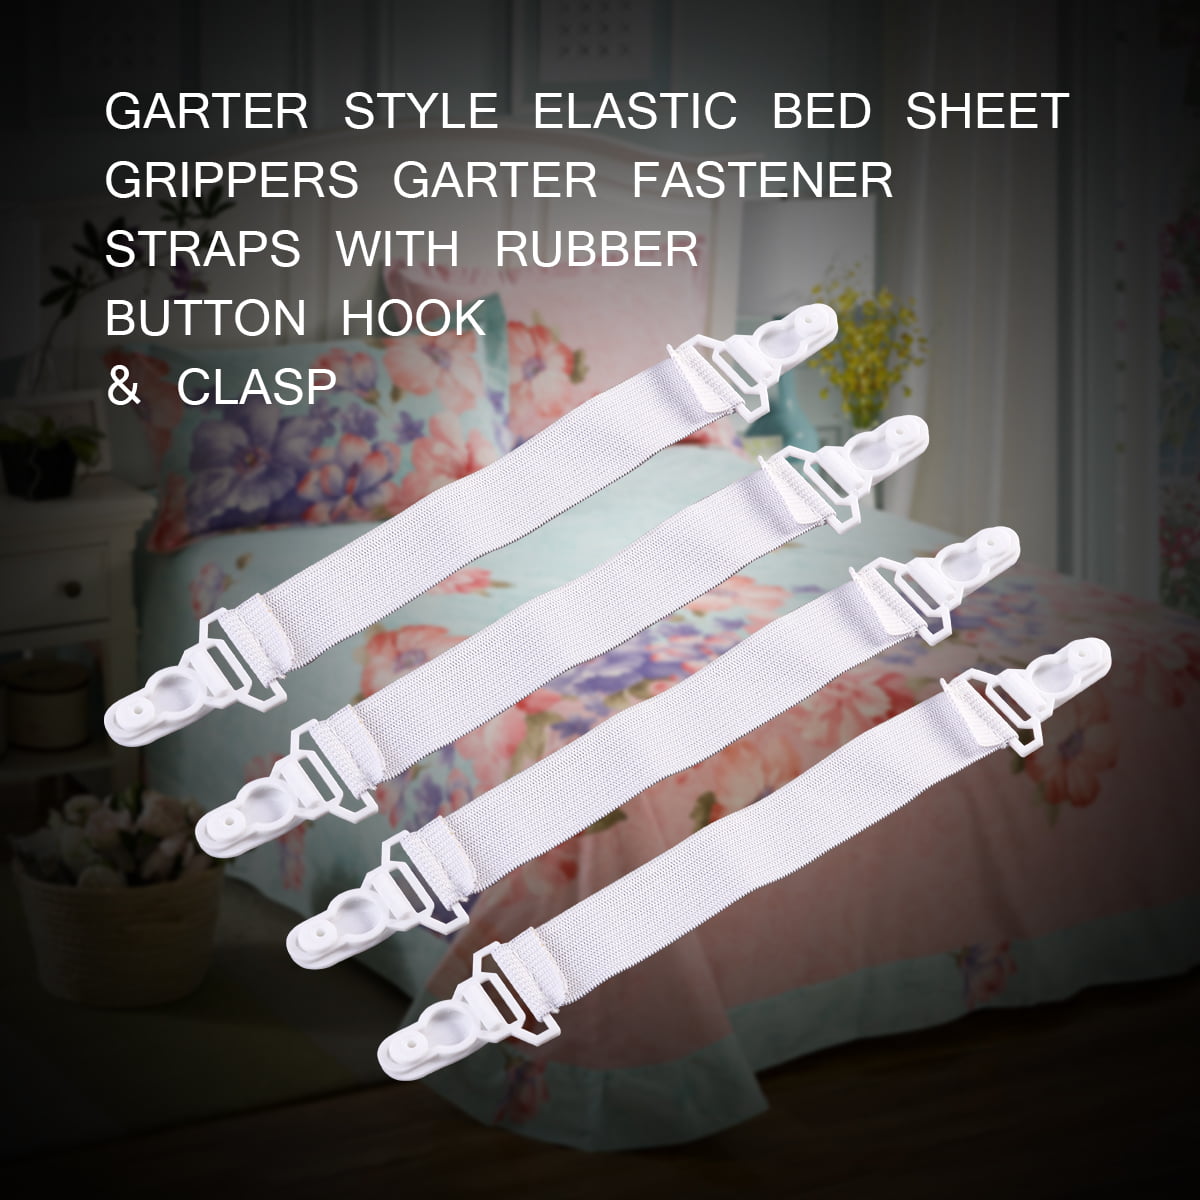 White IMIKEYA 4pcs Garter Style Elastic Bed Sheet Grippers Garter Fastener Straps with Rubber Button Hook & Clasp